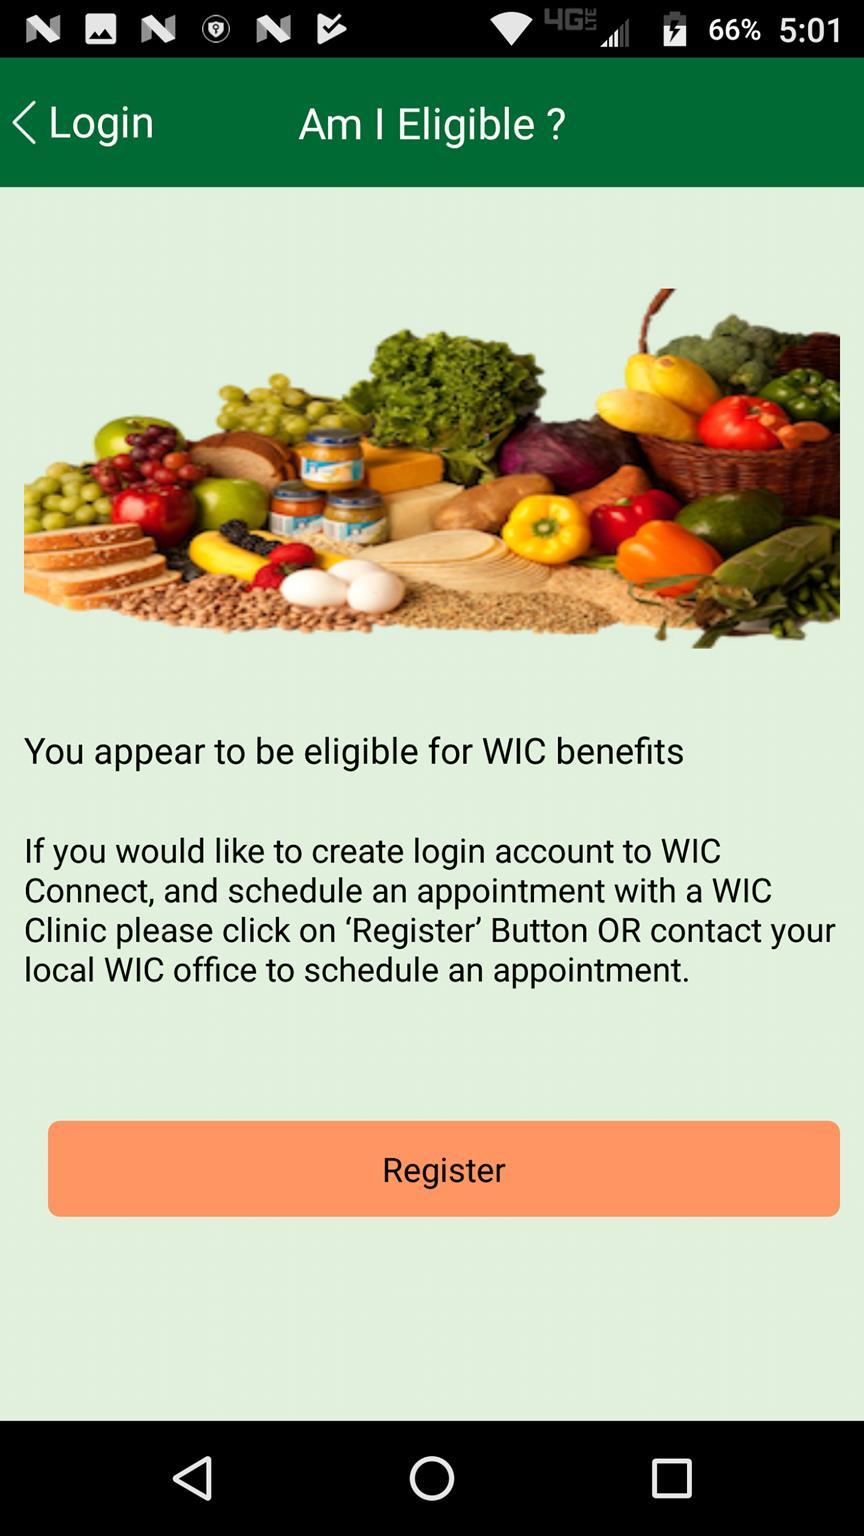 Registering a Prospective WIC Client: How to Register?